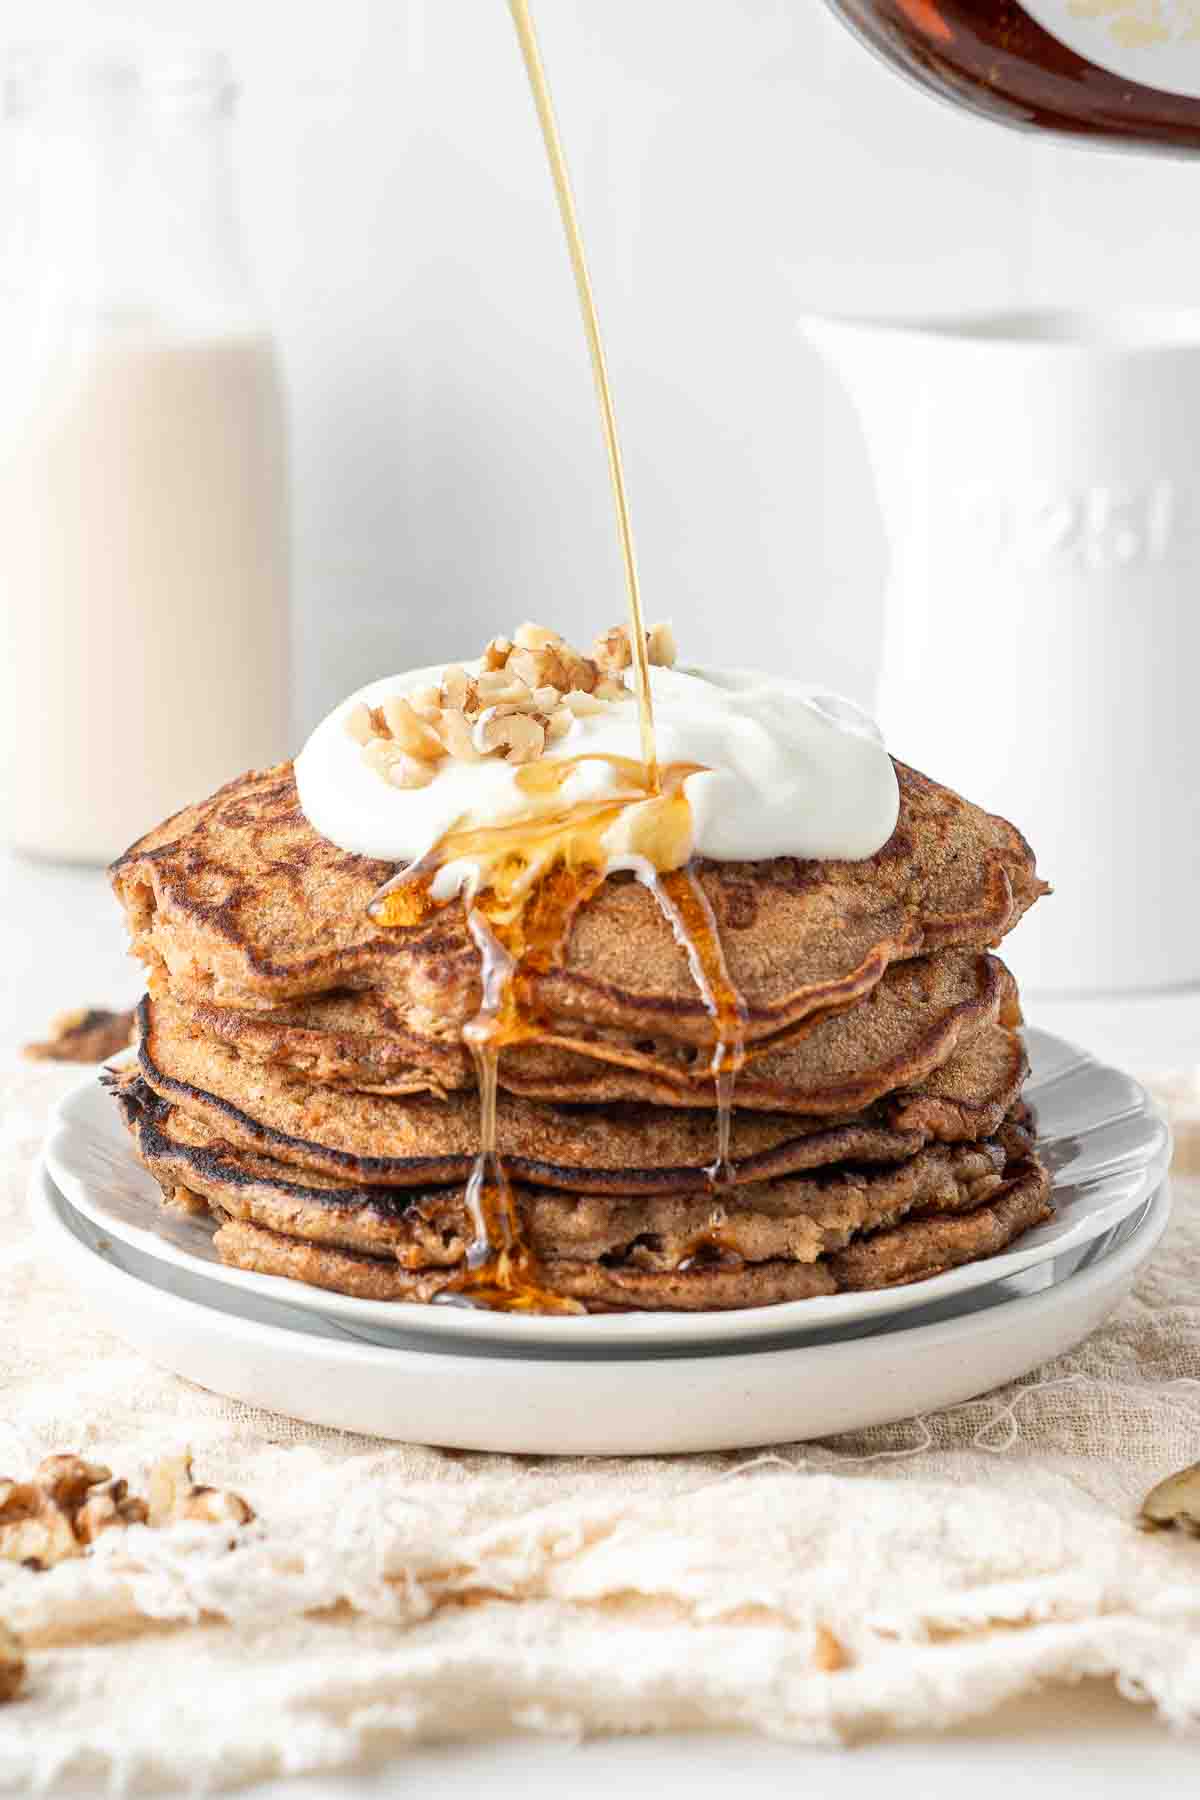 A stack of carrot cake pancakes with maple syrup being drizzled.